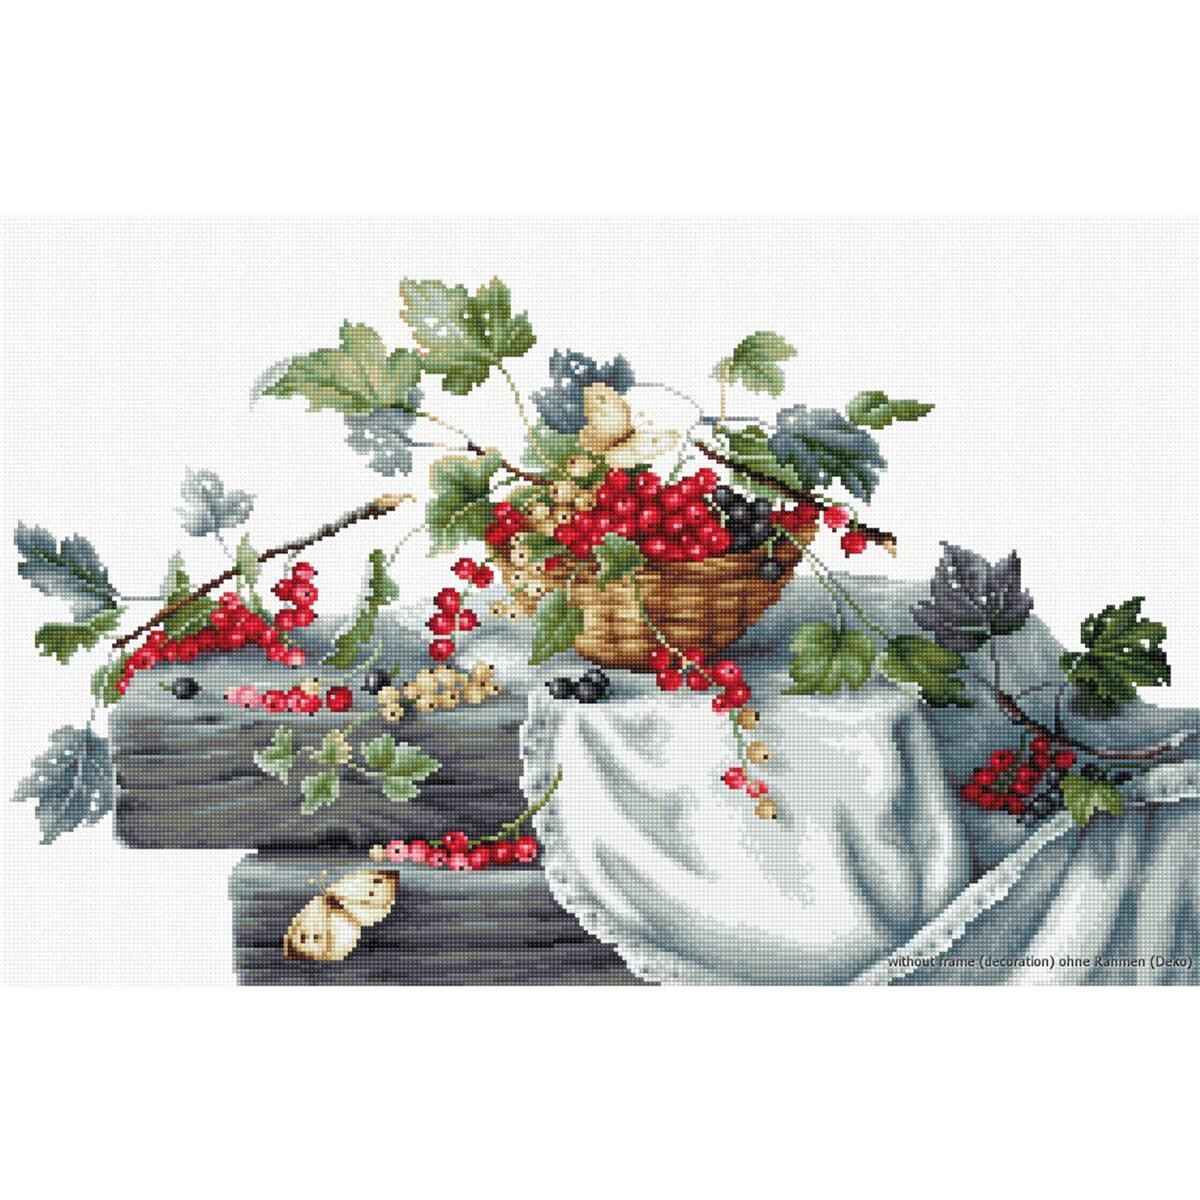 A detailed still life shows a woven basket full of bright...